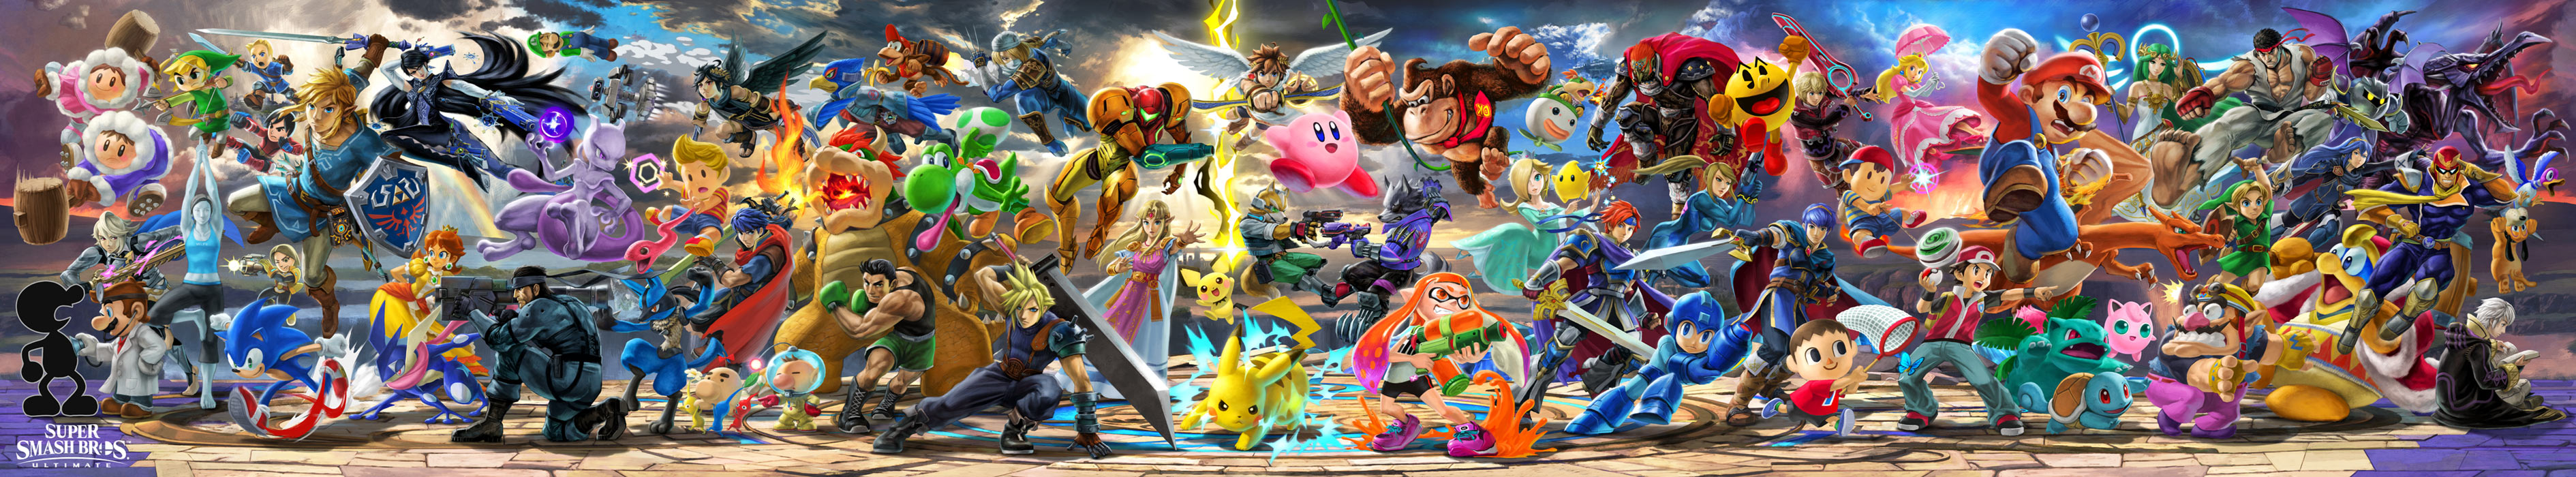 super smash bros ultimate for android apk